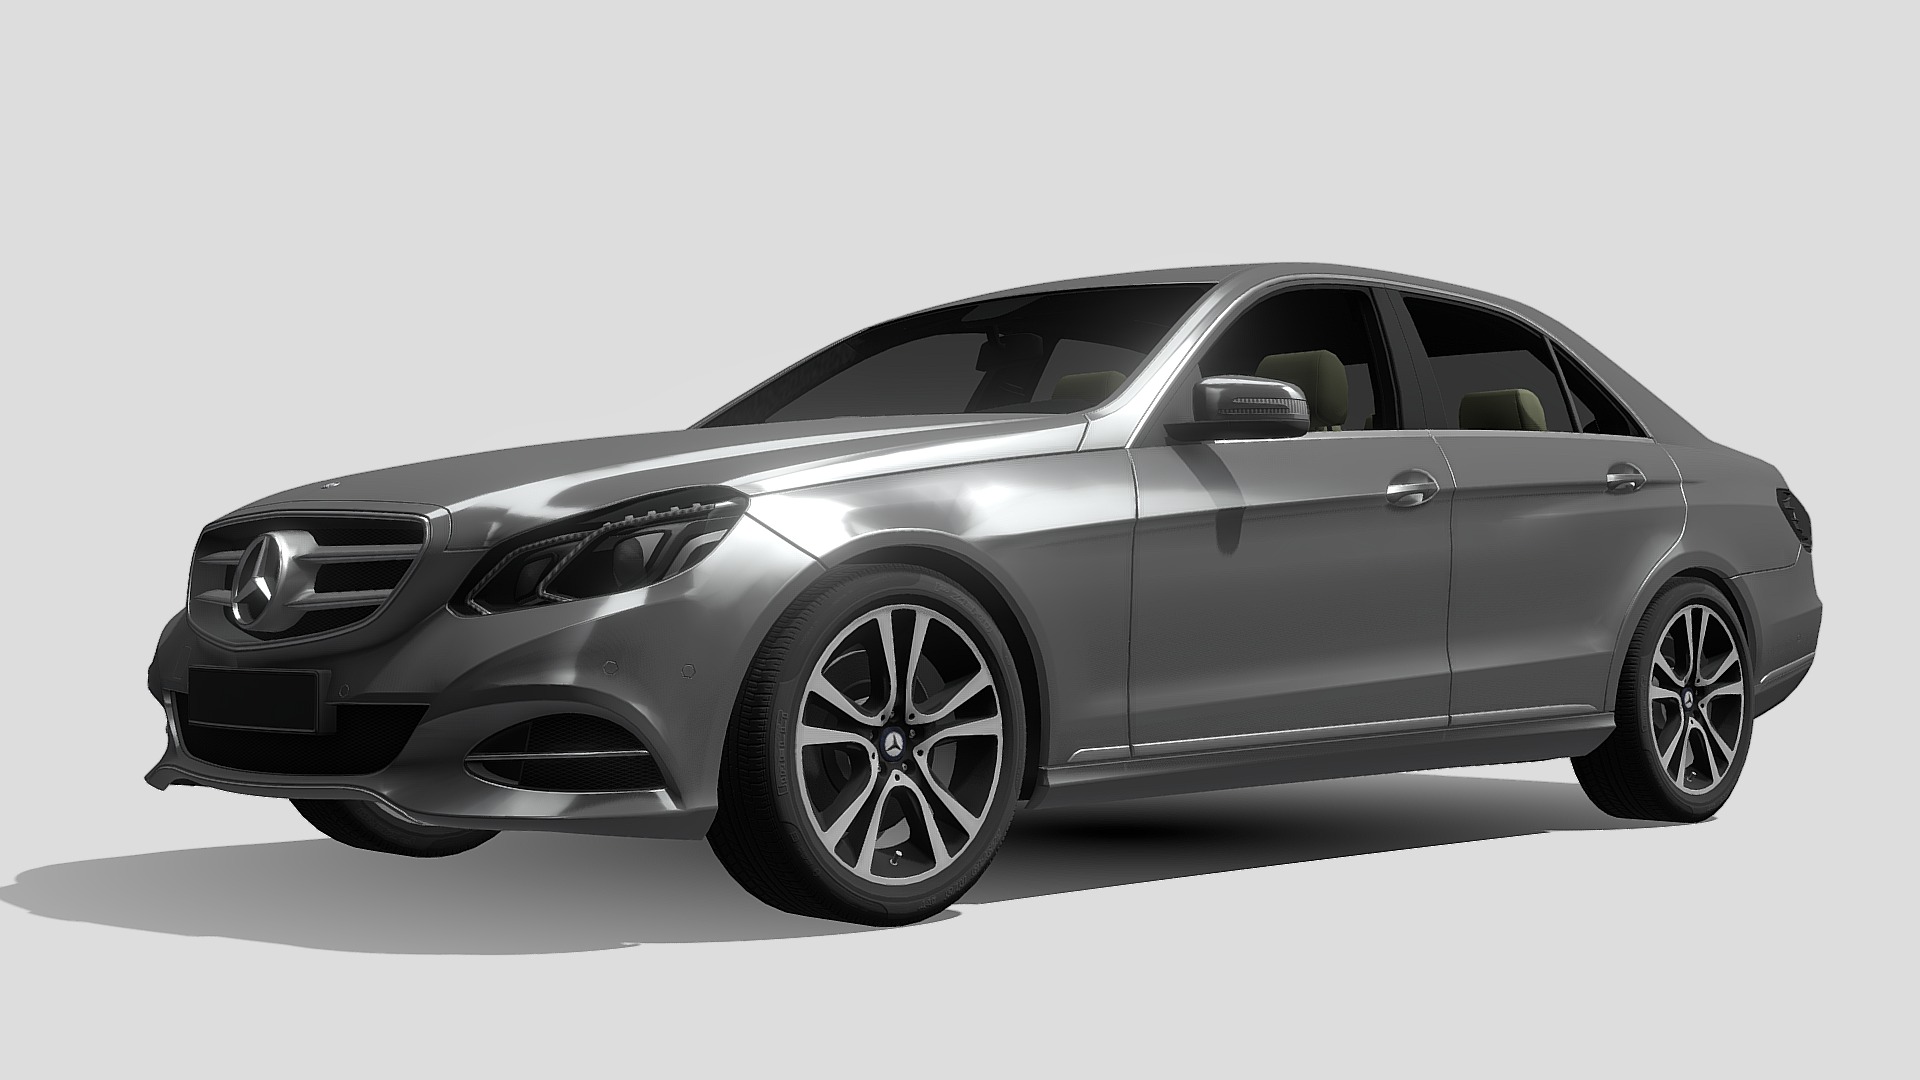 3D model Mercedes Benz Luxurycar Model - This is a 3D model of the Mercedes Benz Luxurycar Model. The 3D model is about a silver car with a white background.